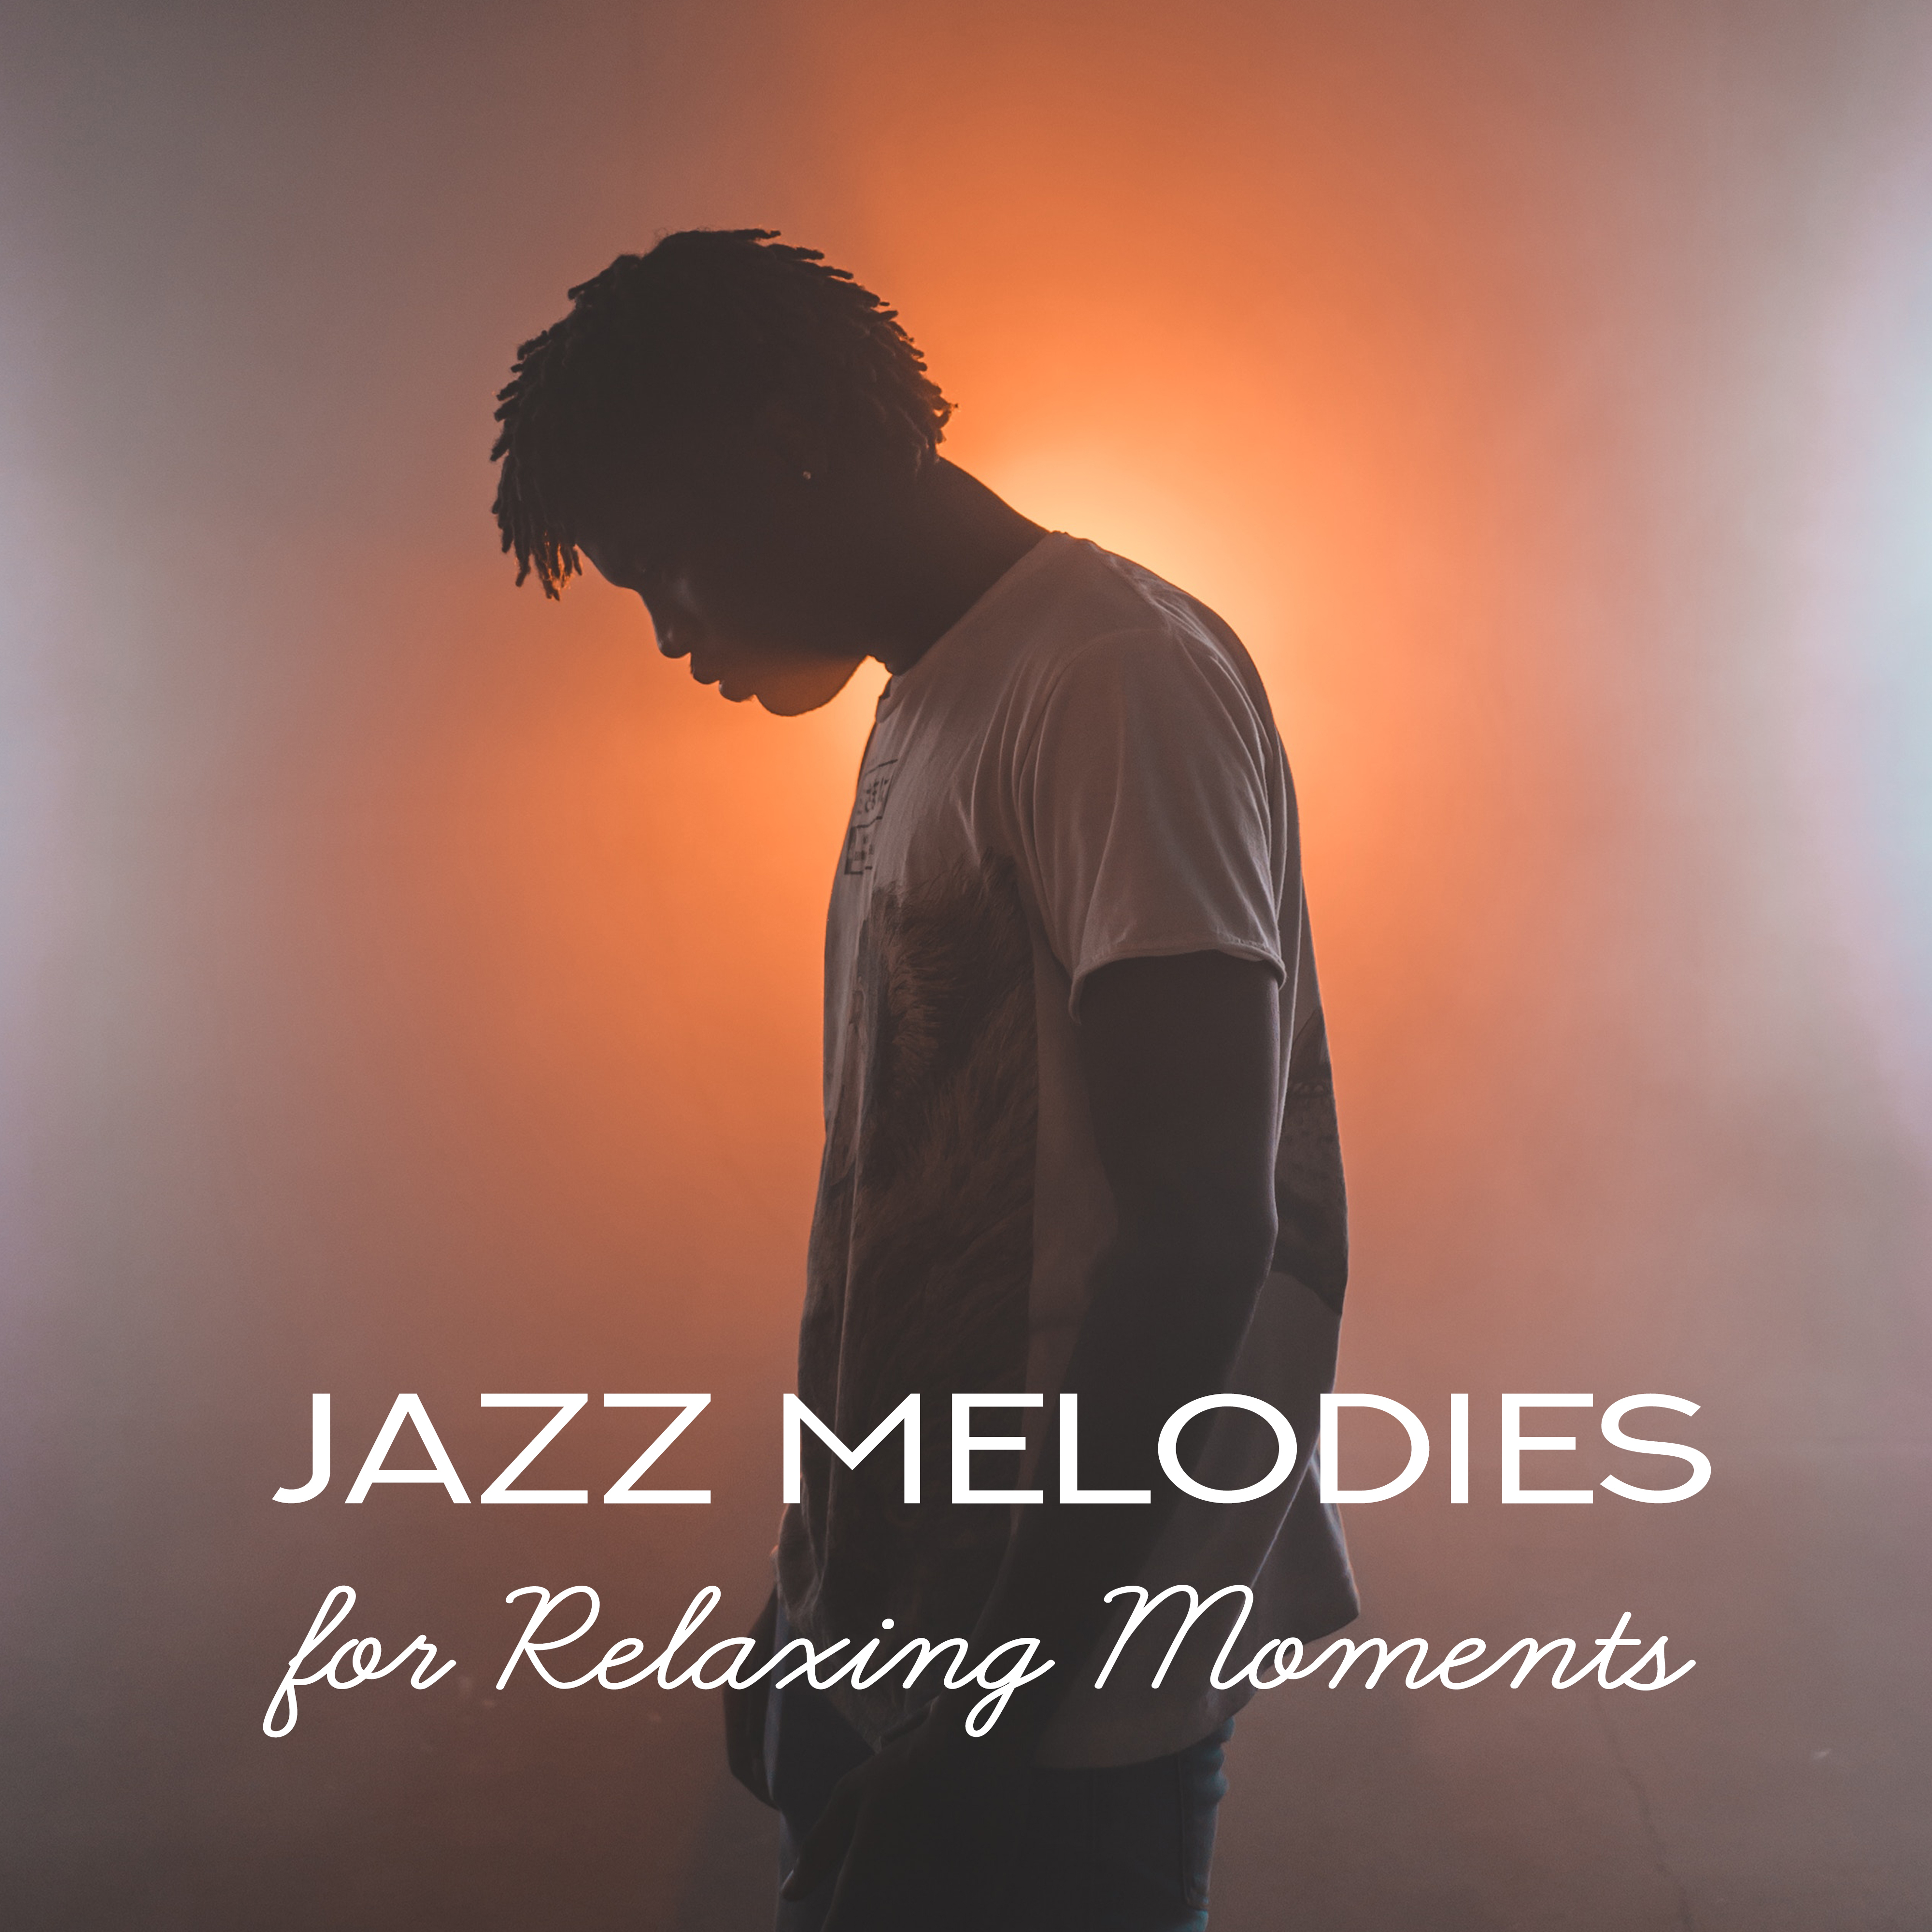 Jazz Melodies for Relaxing Moments